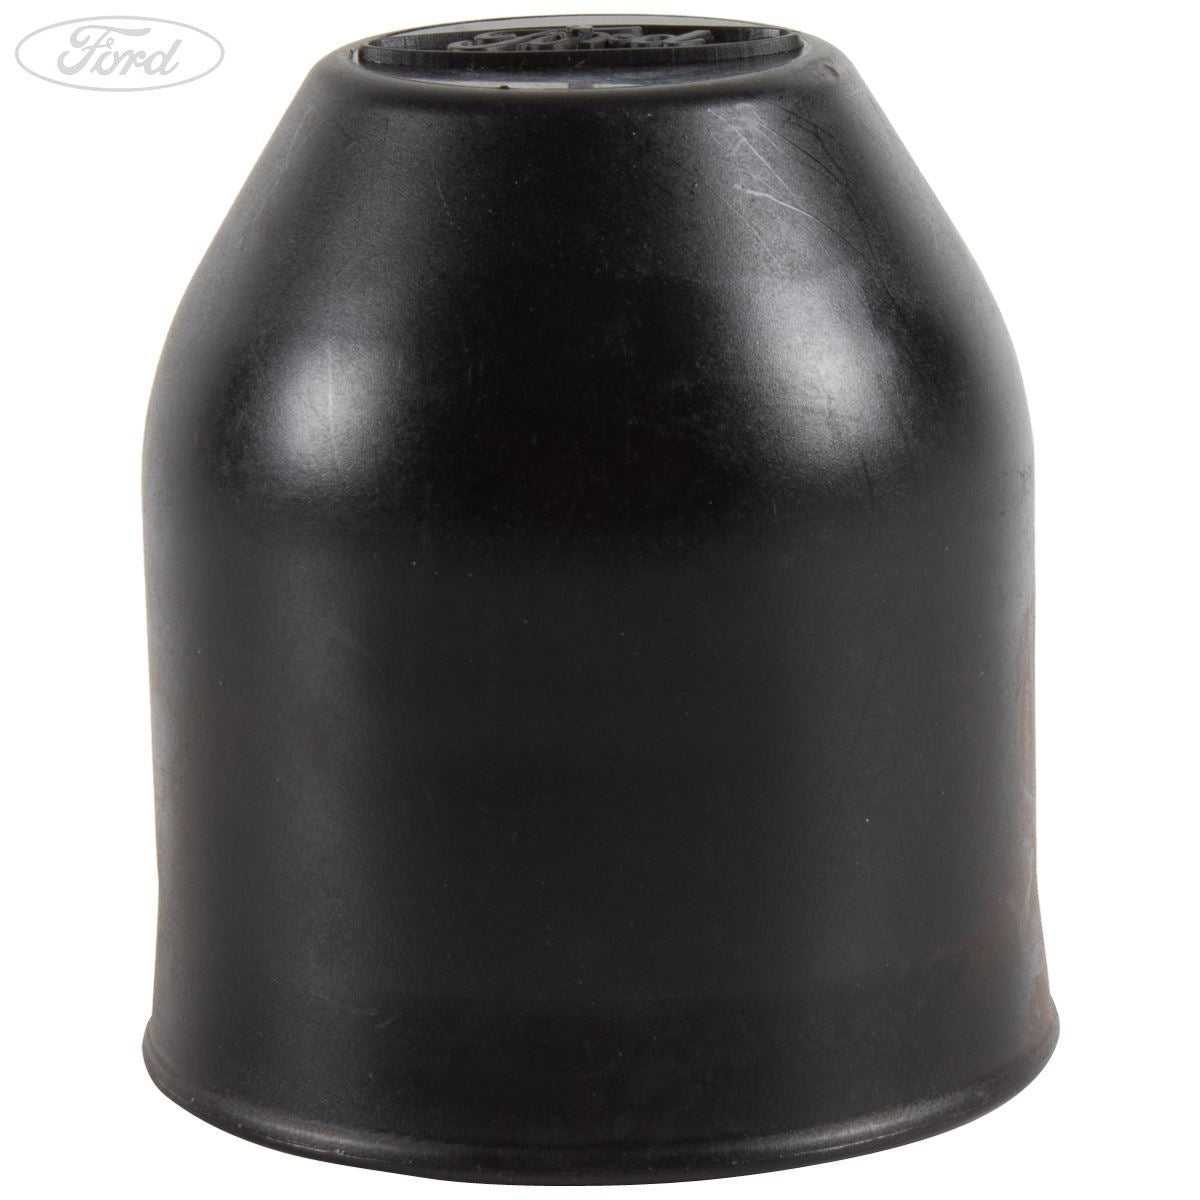 Ford, TOW BAR PROTECTIVE CAP COVER